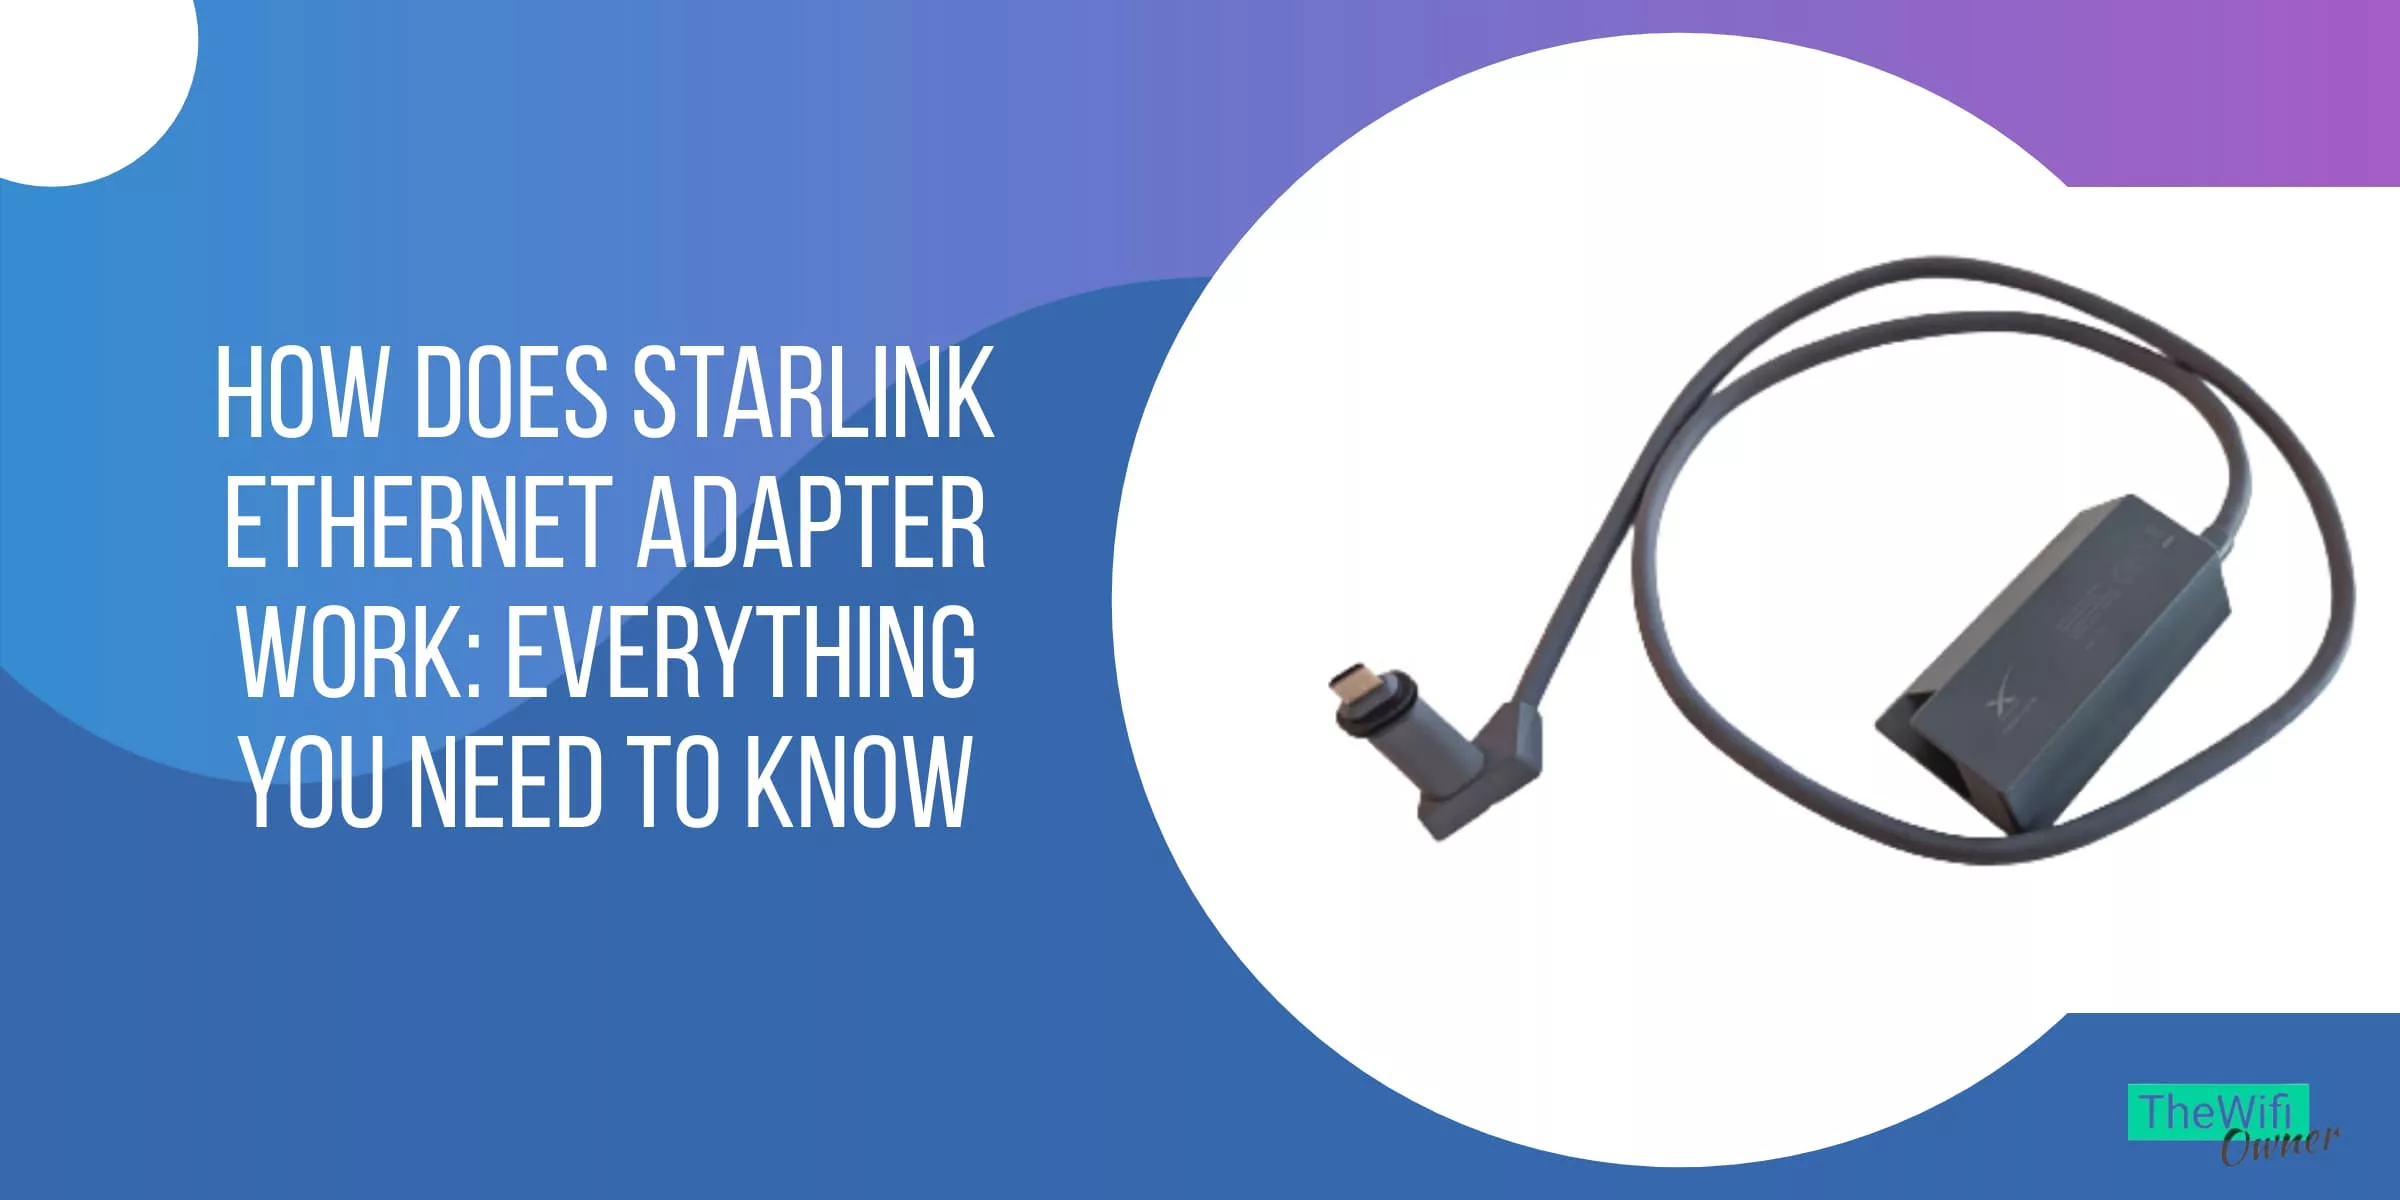 How Does Starlink Ethernet Adapter Work and How to Troubleshoot It